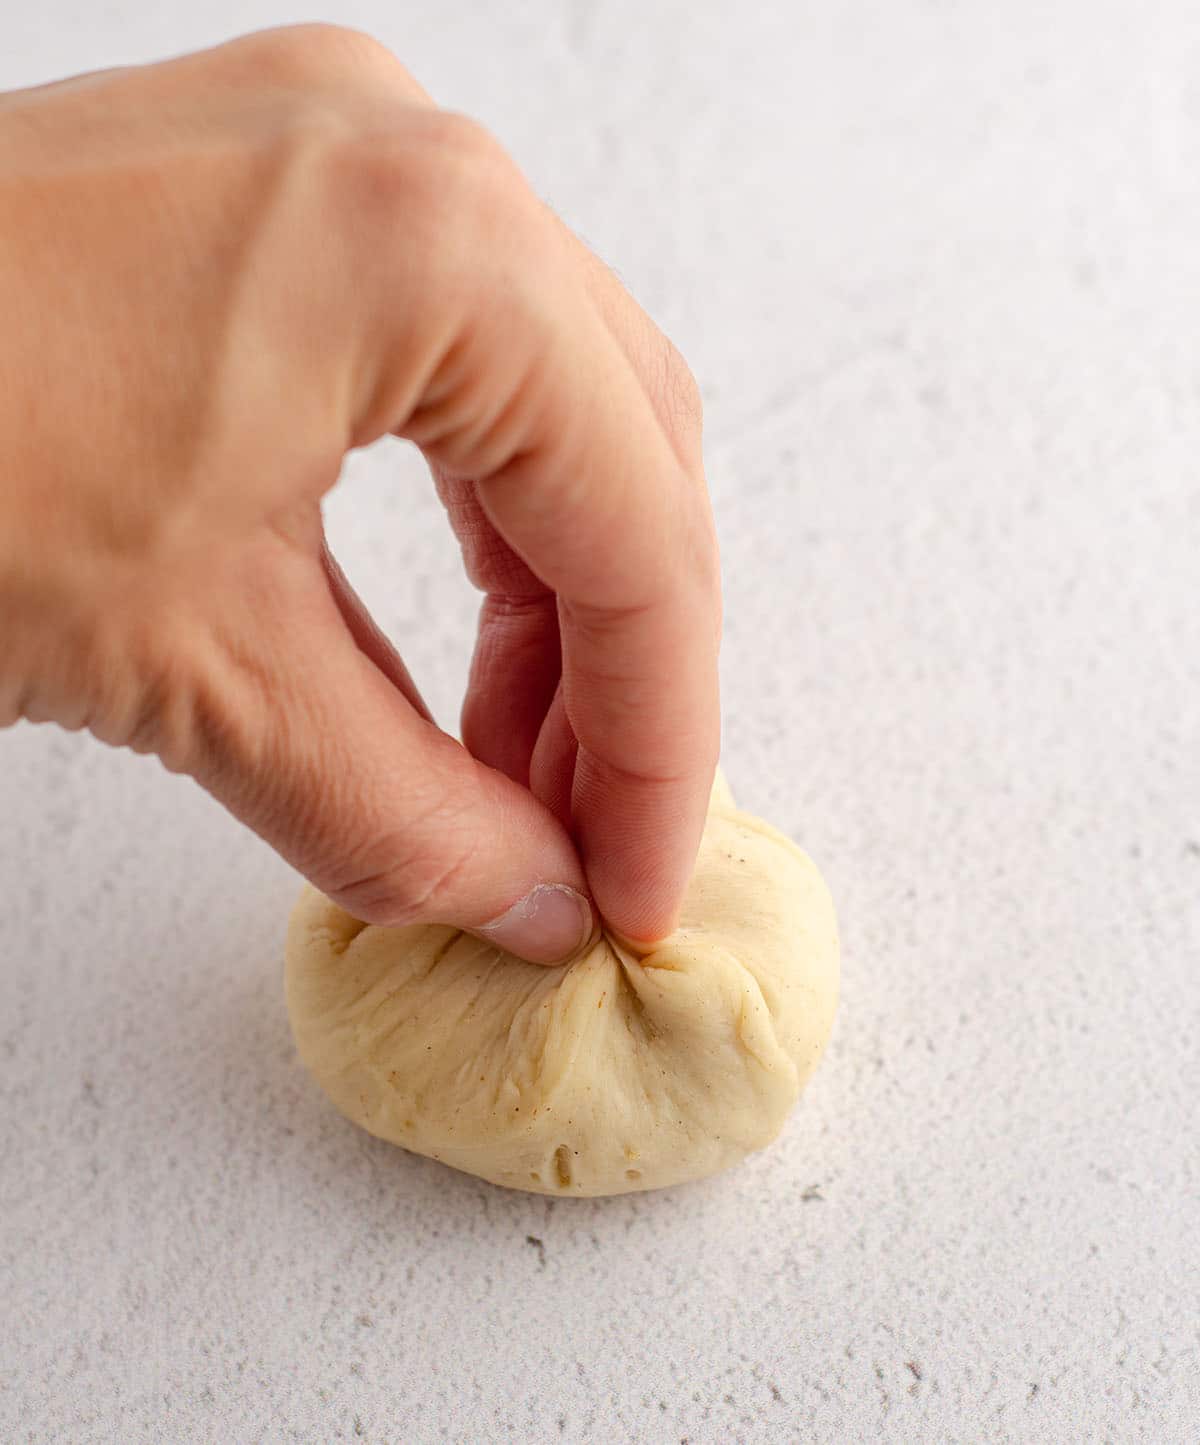 hands forming bread dough into a pouch for rolls